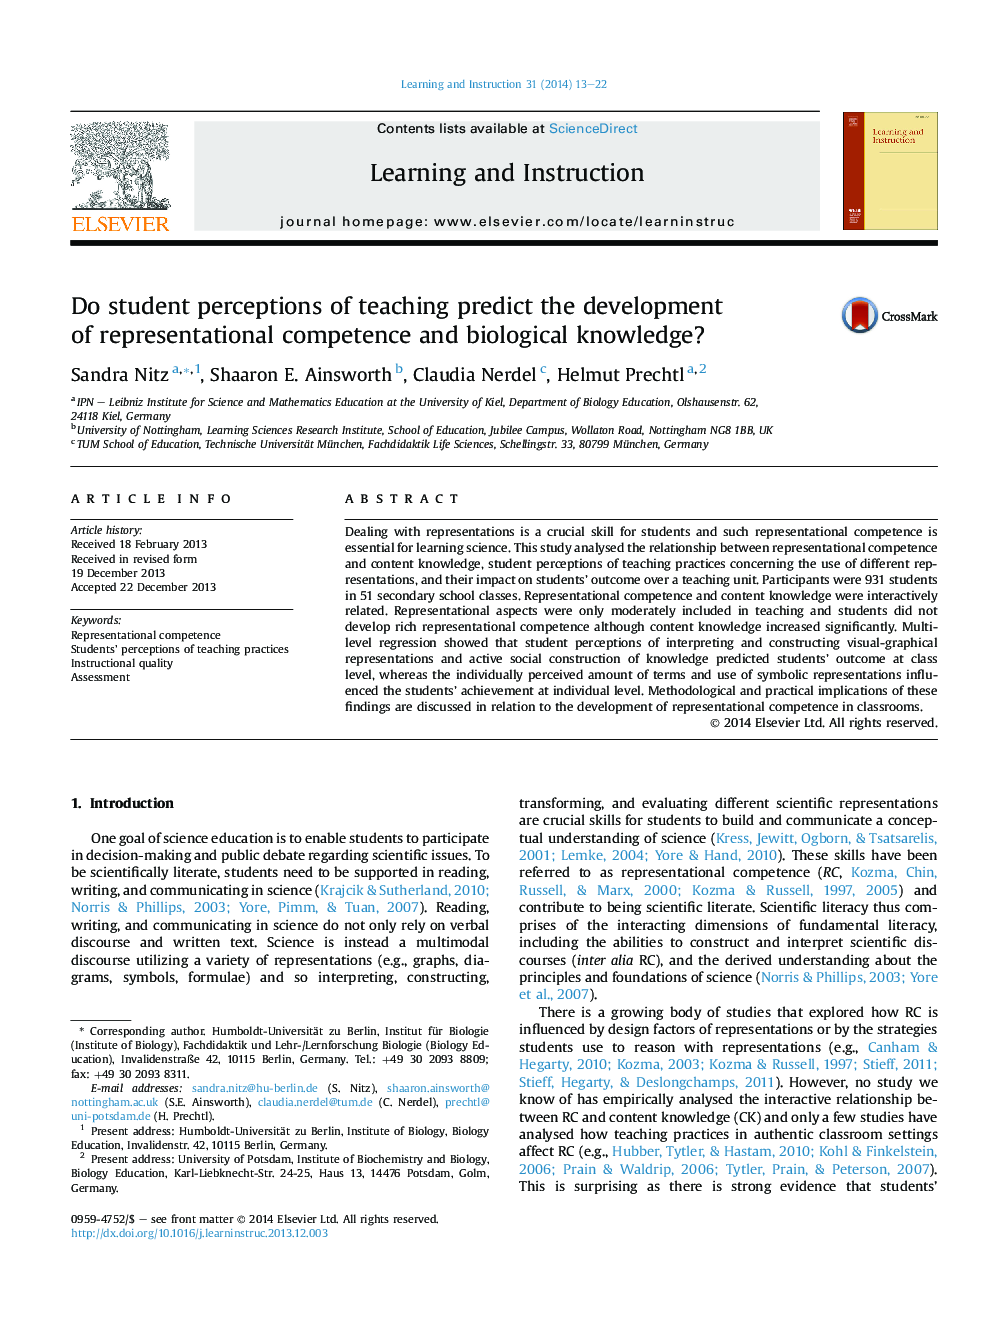 Do student perceptions of teaching predict the development of representational competence and biological knowledge?